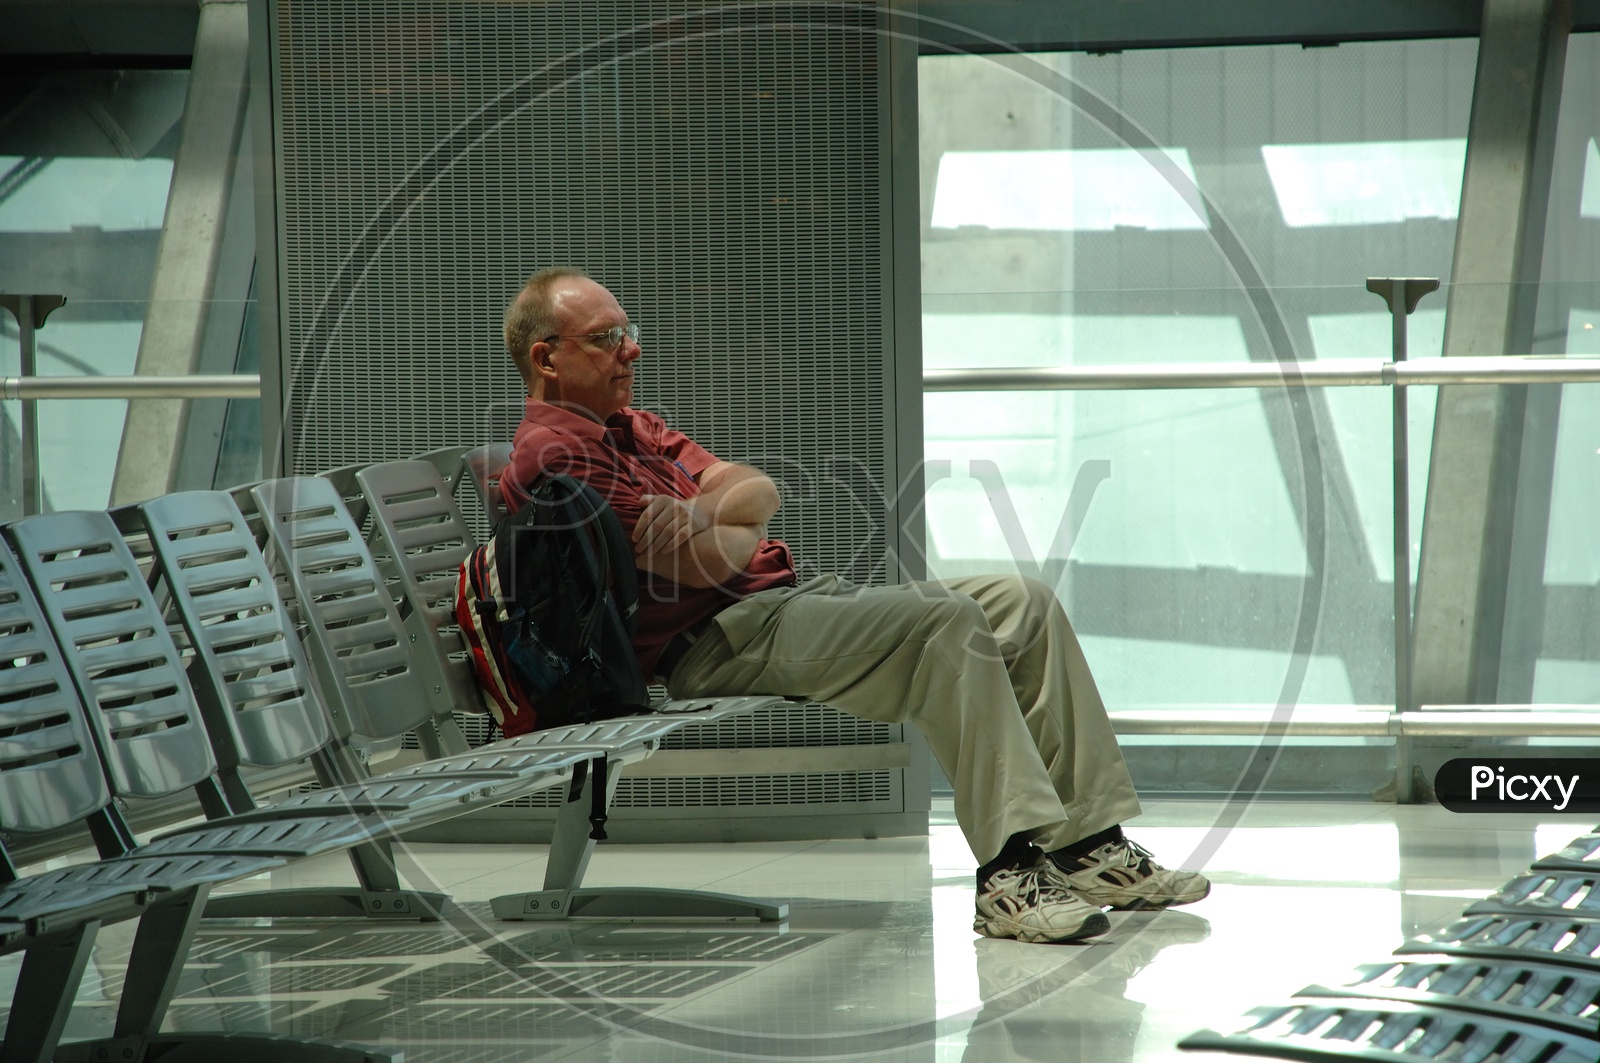 An old man waiting at the airport